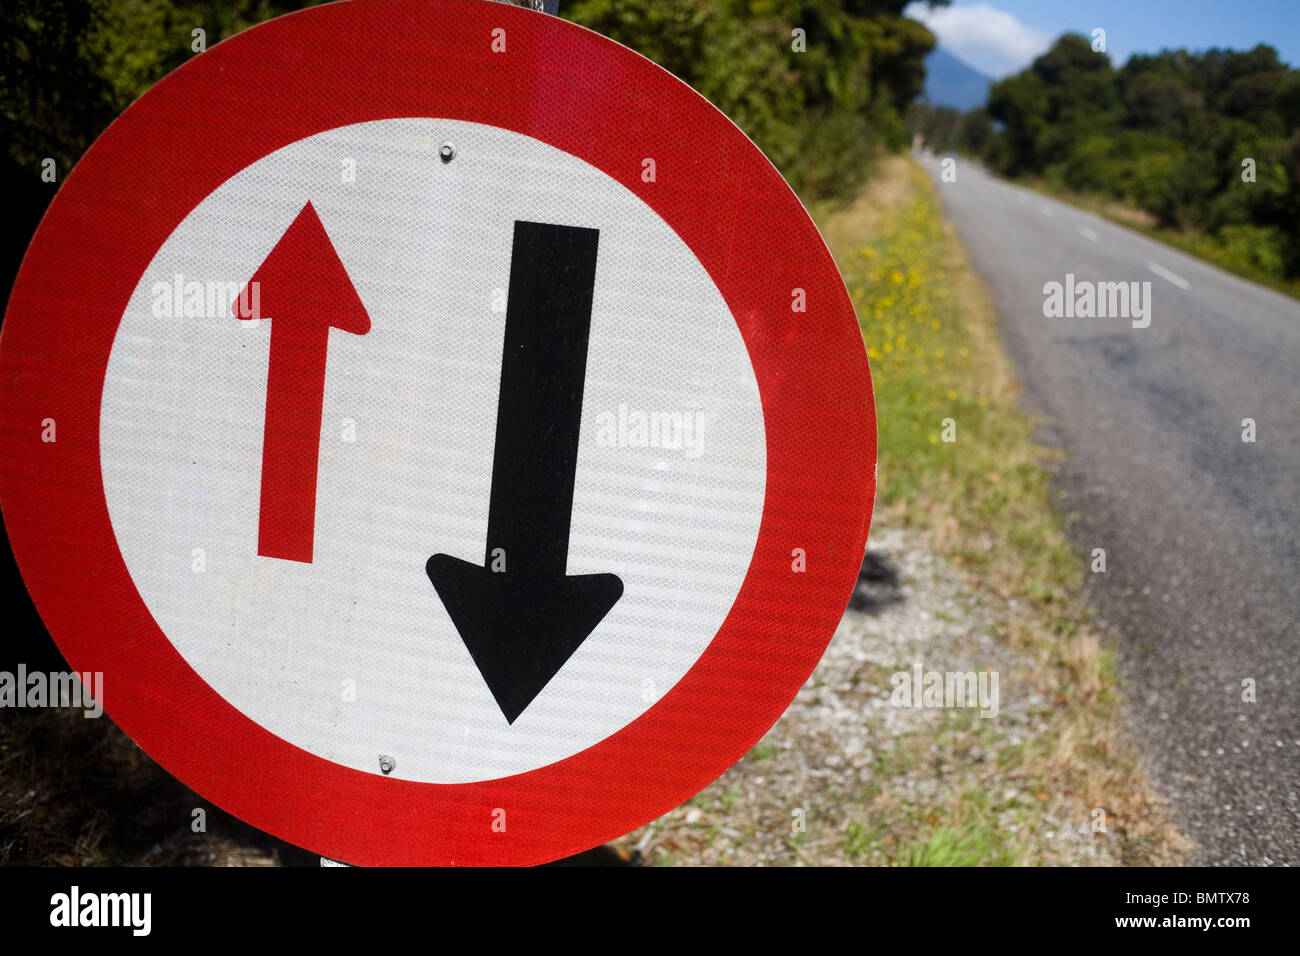 Give priority to oncoming traffic road sign. Stock Photo